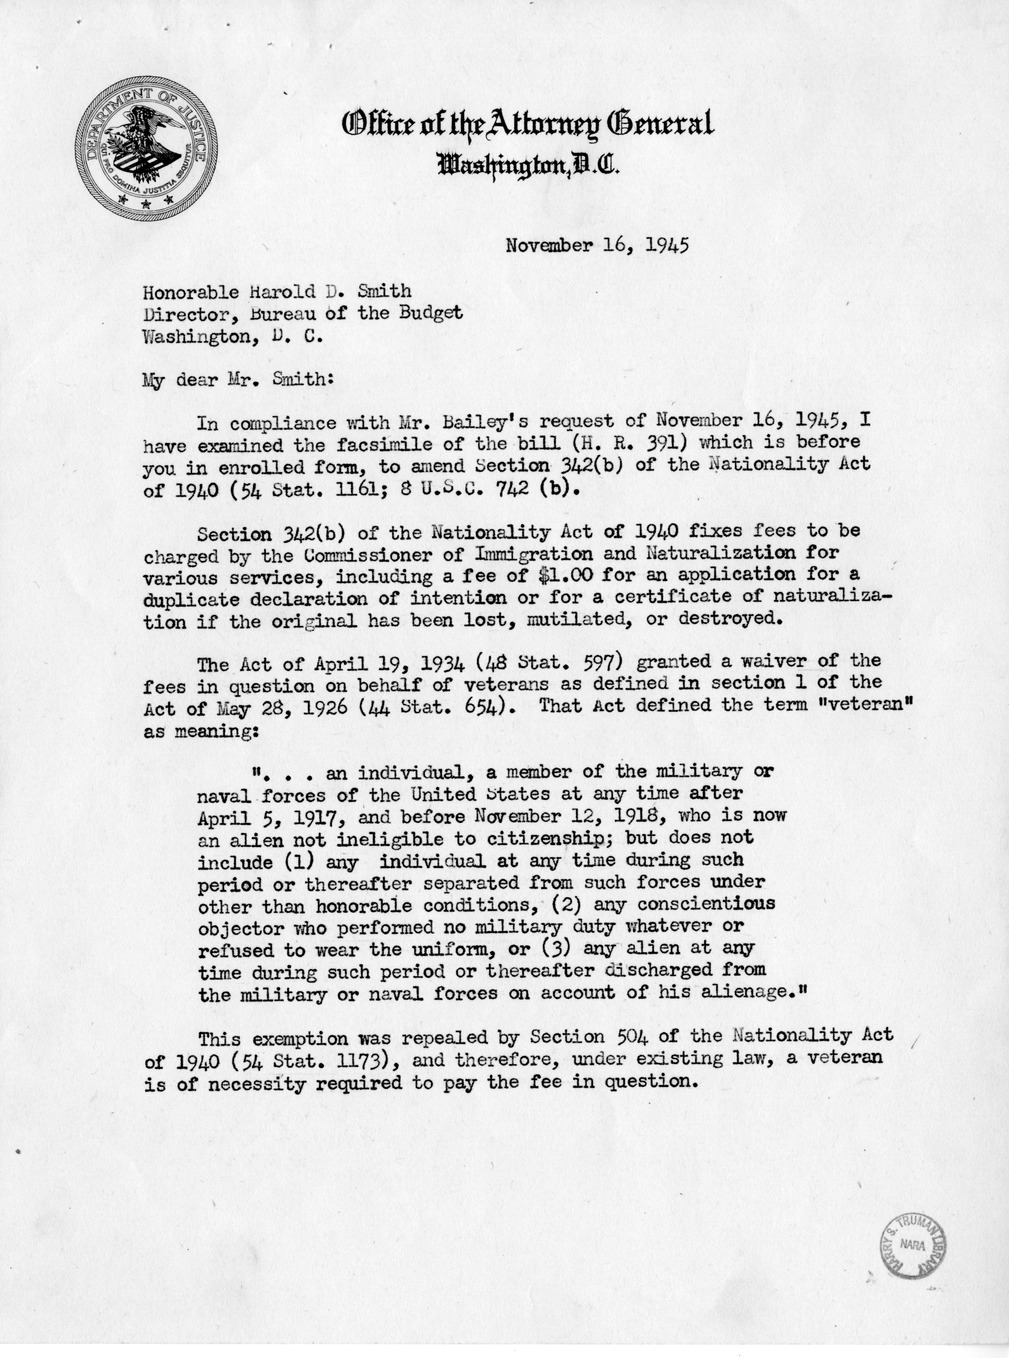 Memorandum from Frederick J. Bailey to M. C. Latta, H.R. 391, To Amend Section 342 (B) of the Nationality Act of 1940, with Attachments